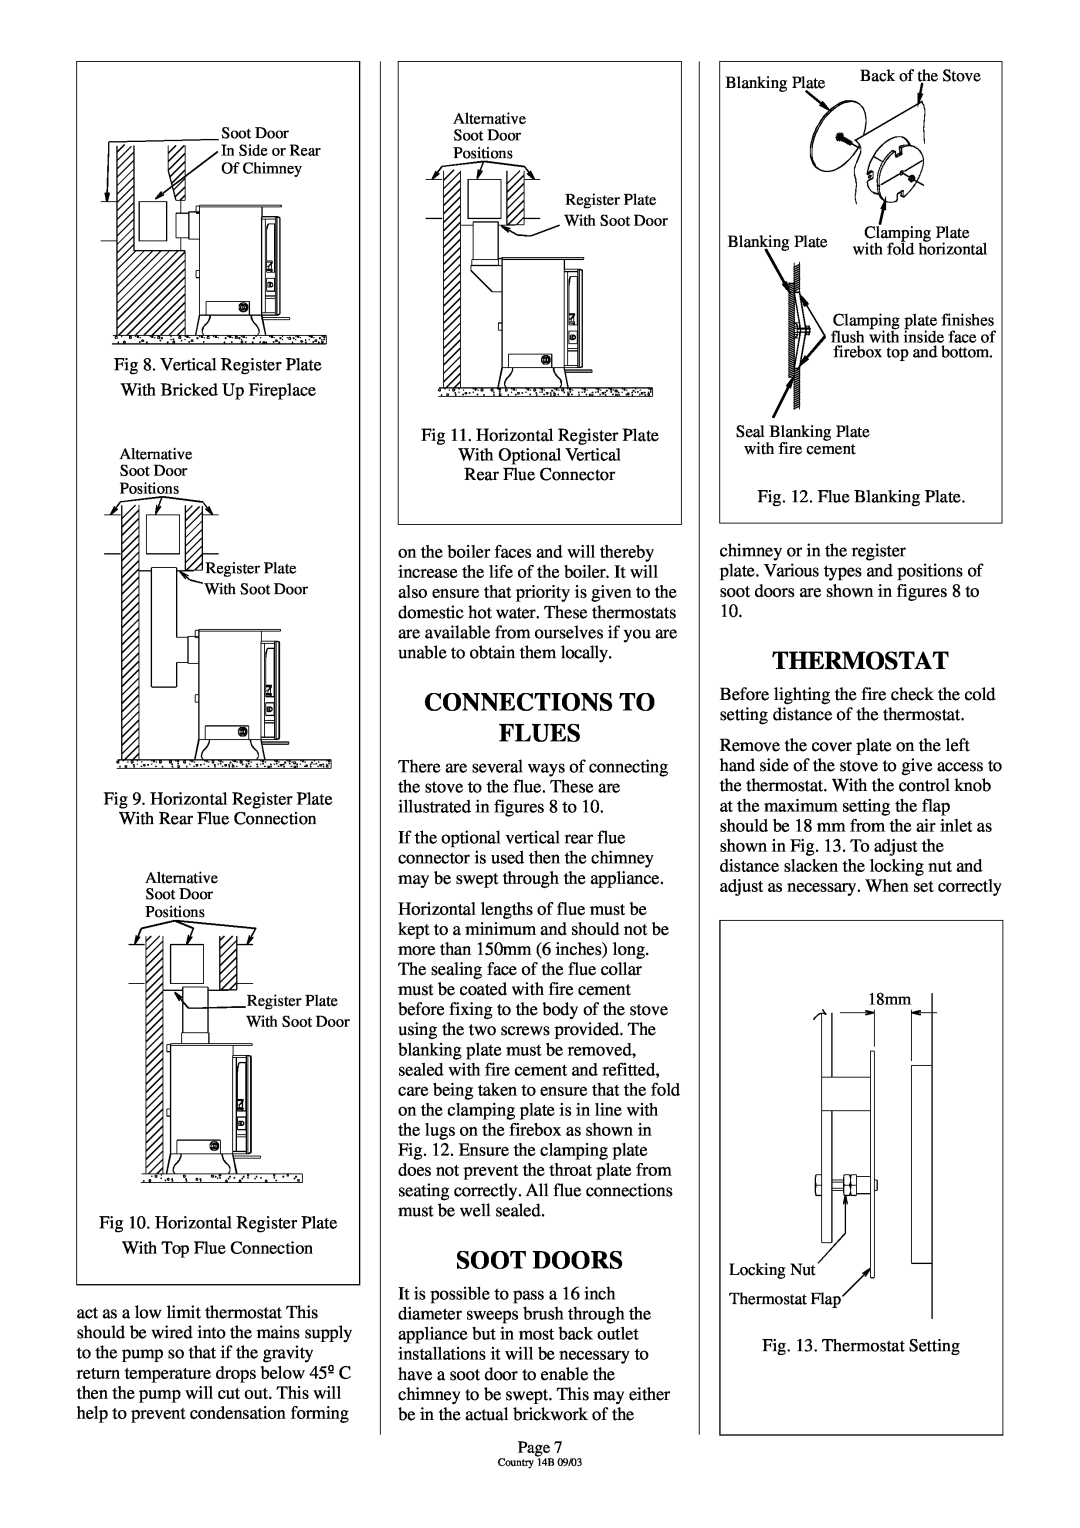 Charnwood Country 14B installation instructions Connections To Flues, Soot Doors, Thermostat 